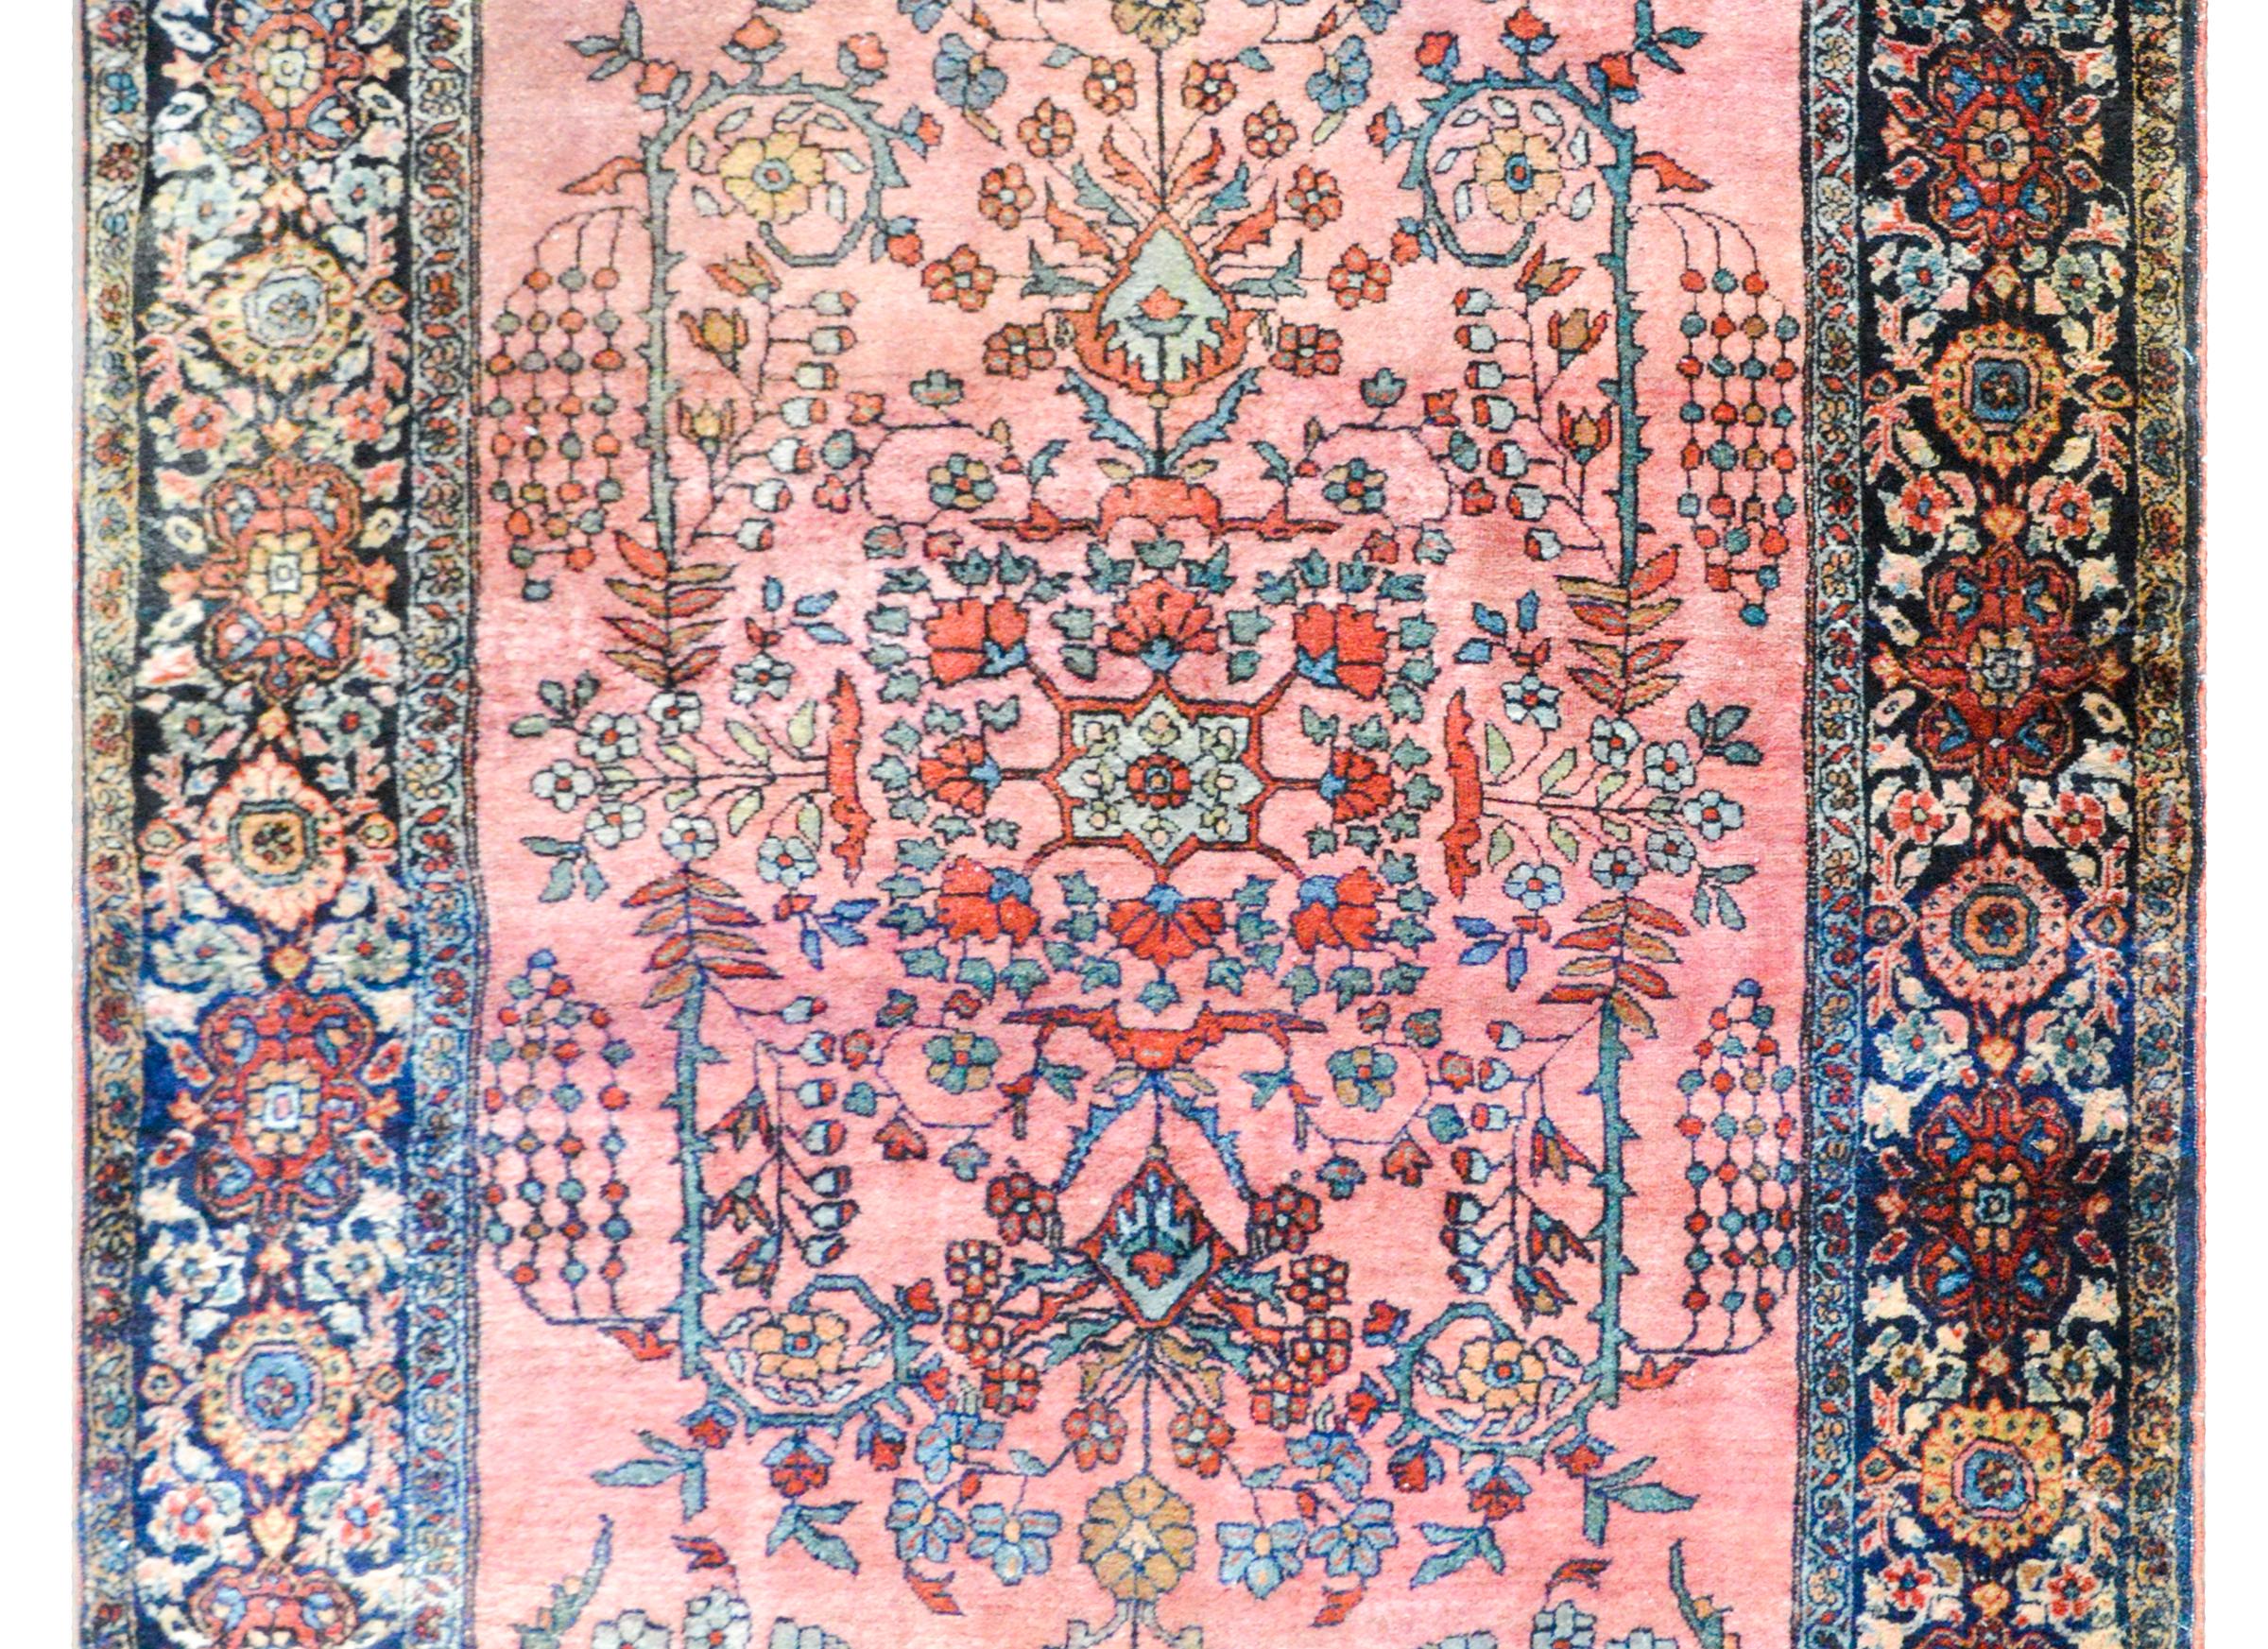 A wonderful early 20th century Persian Sarouk Farahan rug with a beautiful mirrored floral pattern woven in coral, light indigo, and gold against a pink background, and surrounded by a wide border with a large-scale repeated floral pattern woven in